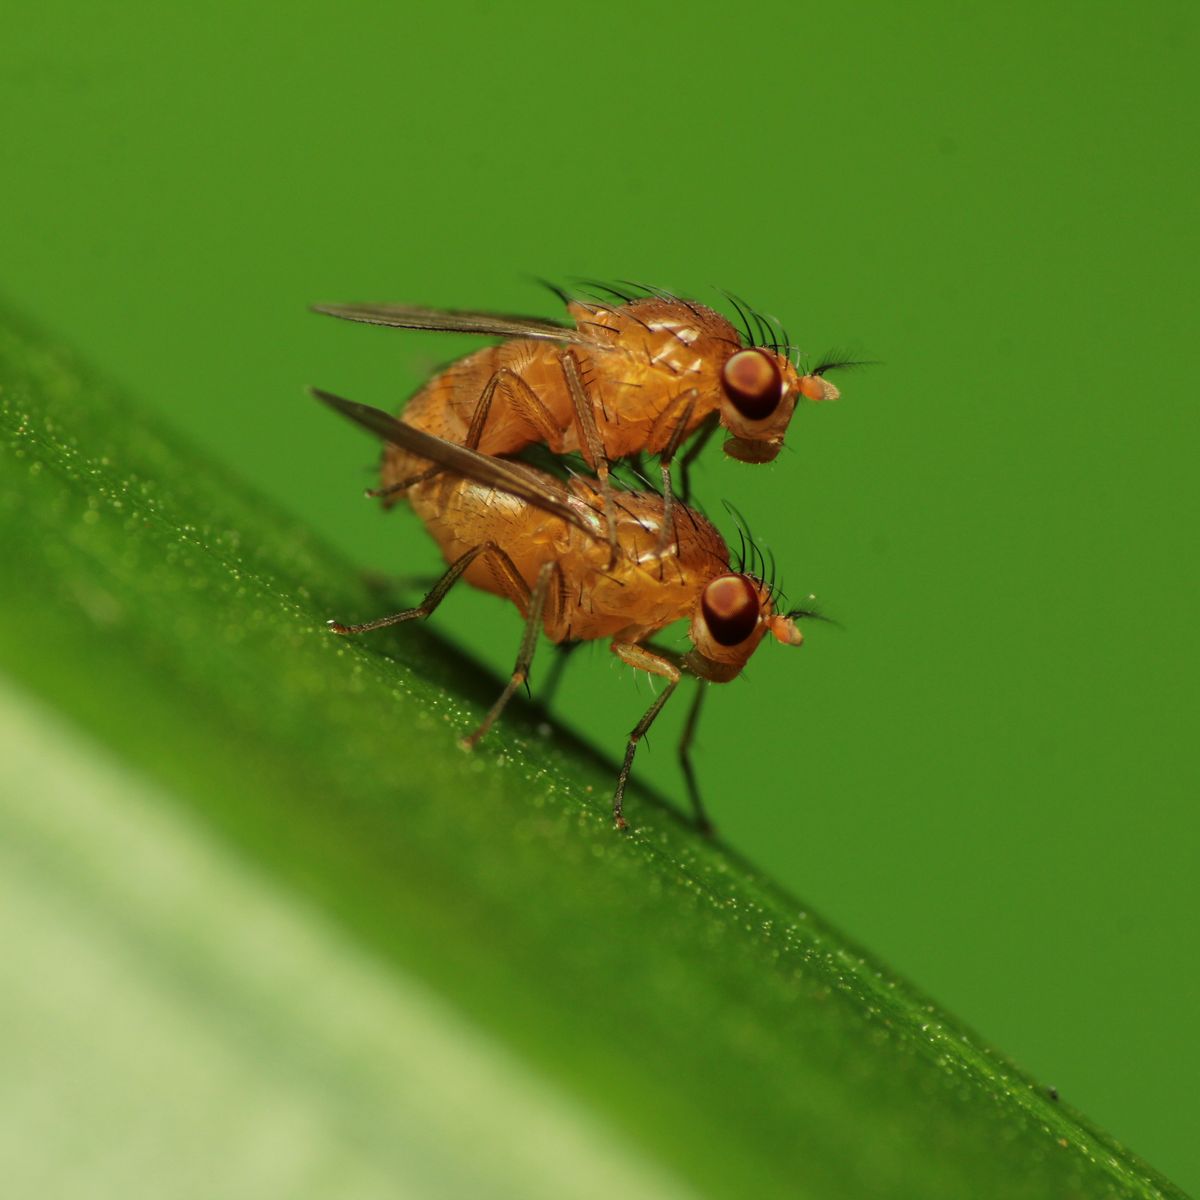 https://hips.hearstapps.com/hmg-prod/images/pair-of-fruit-flies-or-drosophila-sp-doing-mating-the-17-news-photo-1626981586.jpg?crop=0.66667xw:1xh;center,top&resize=1200:*